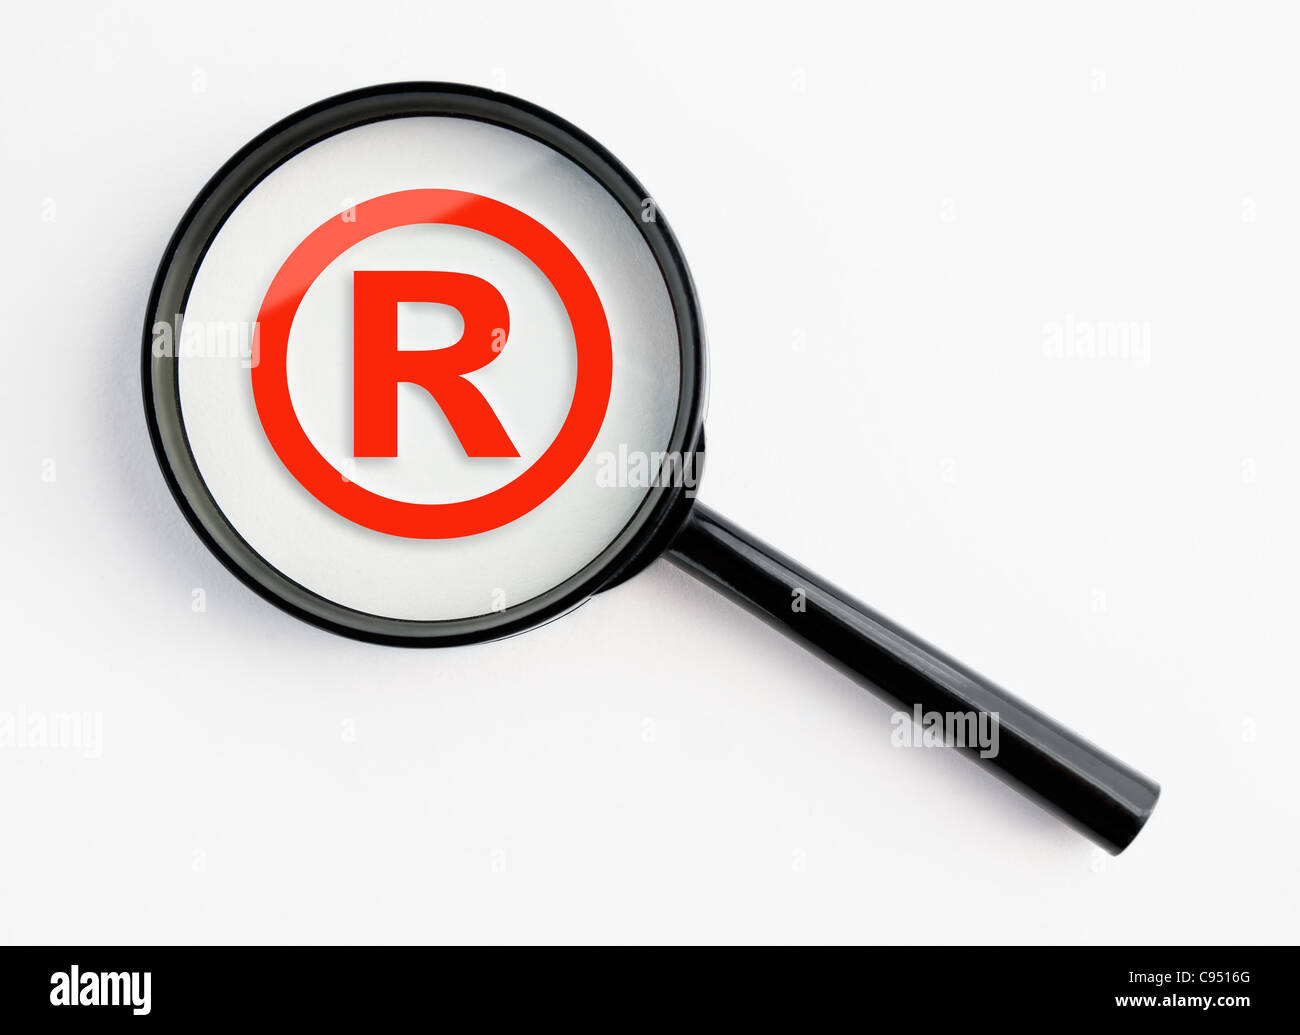 registered trademark under a magnifying glass, with isolated background Stock Photo